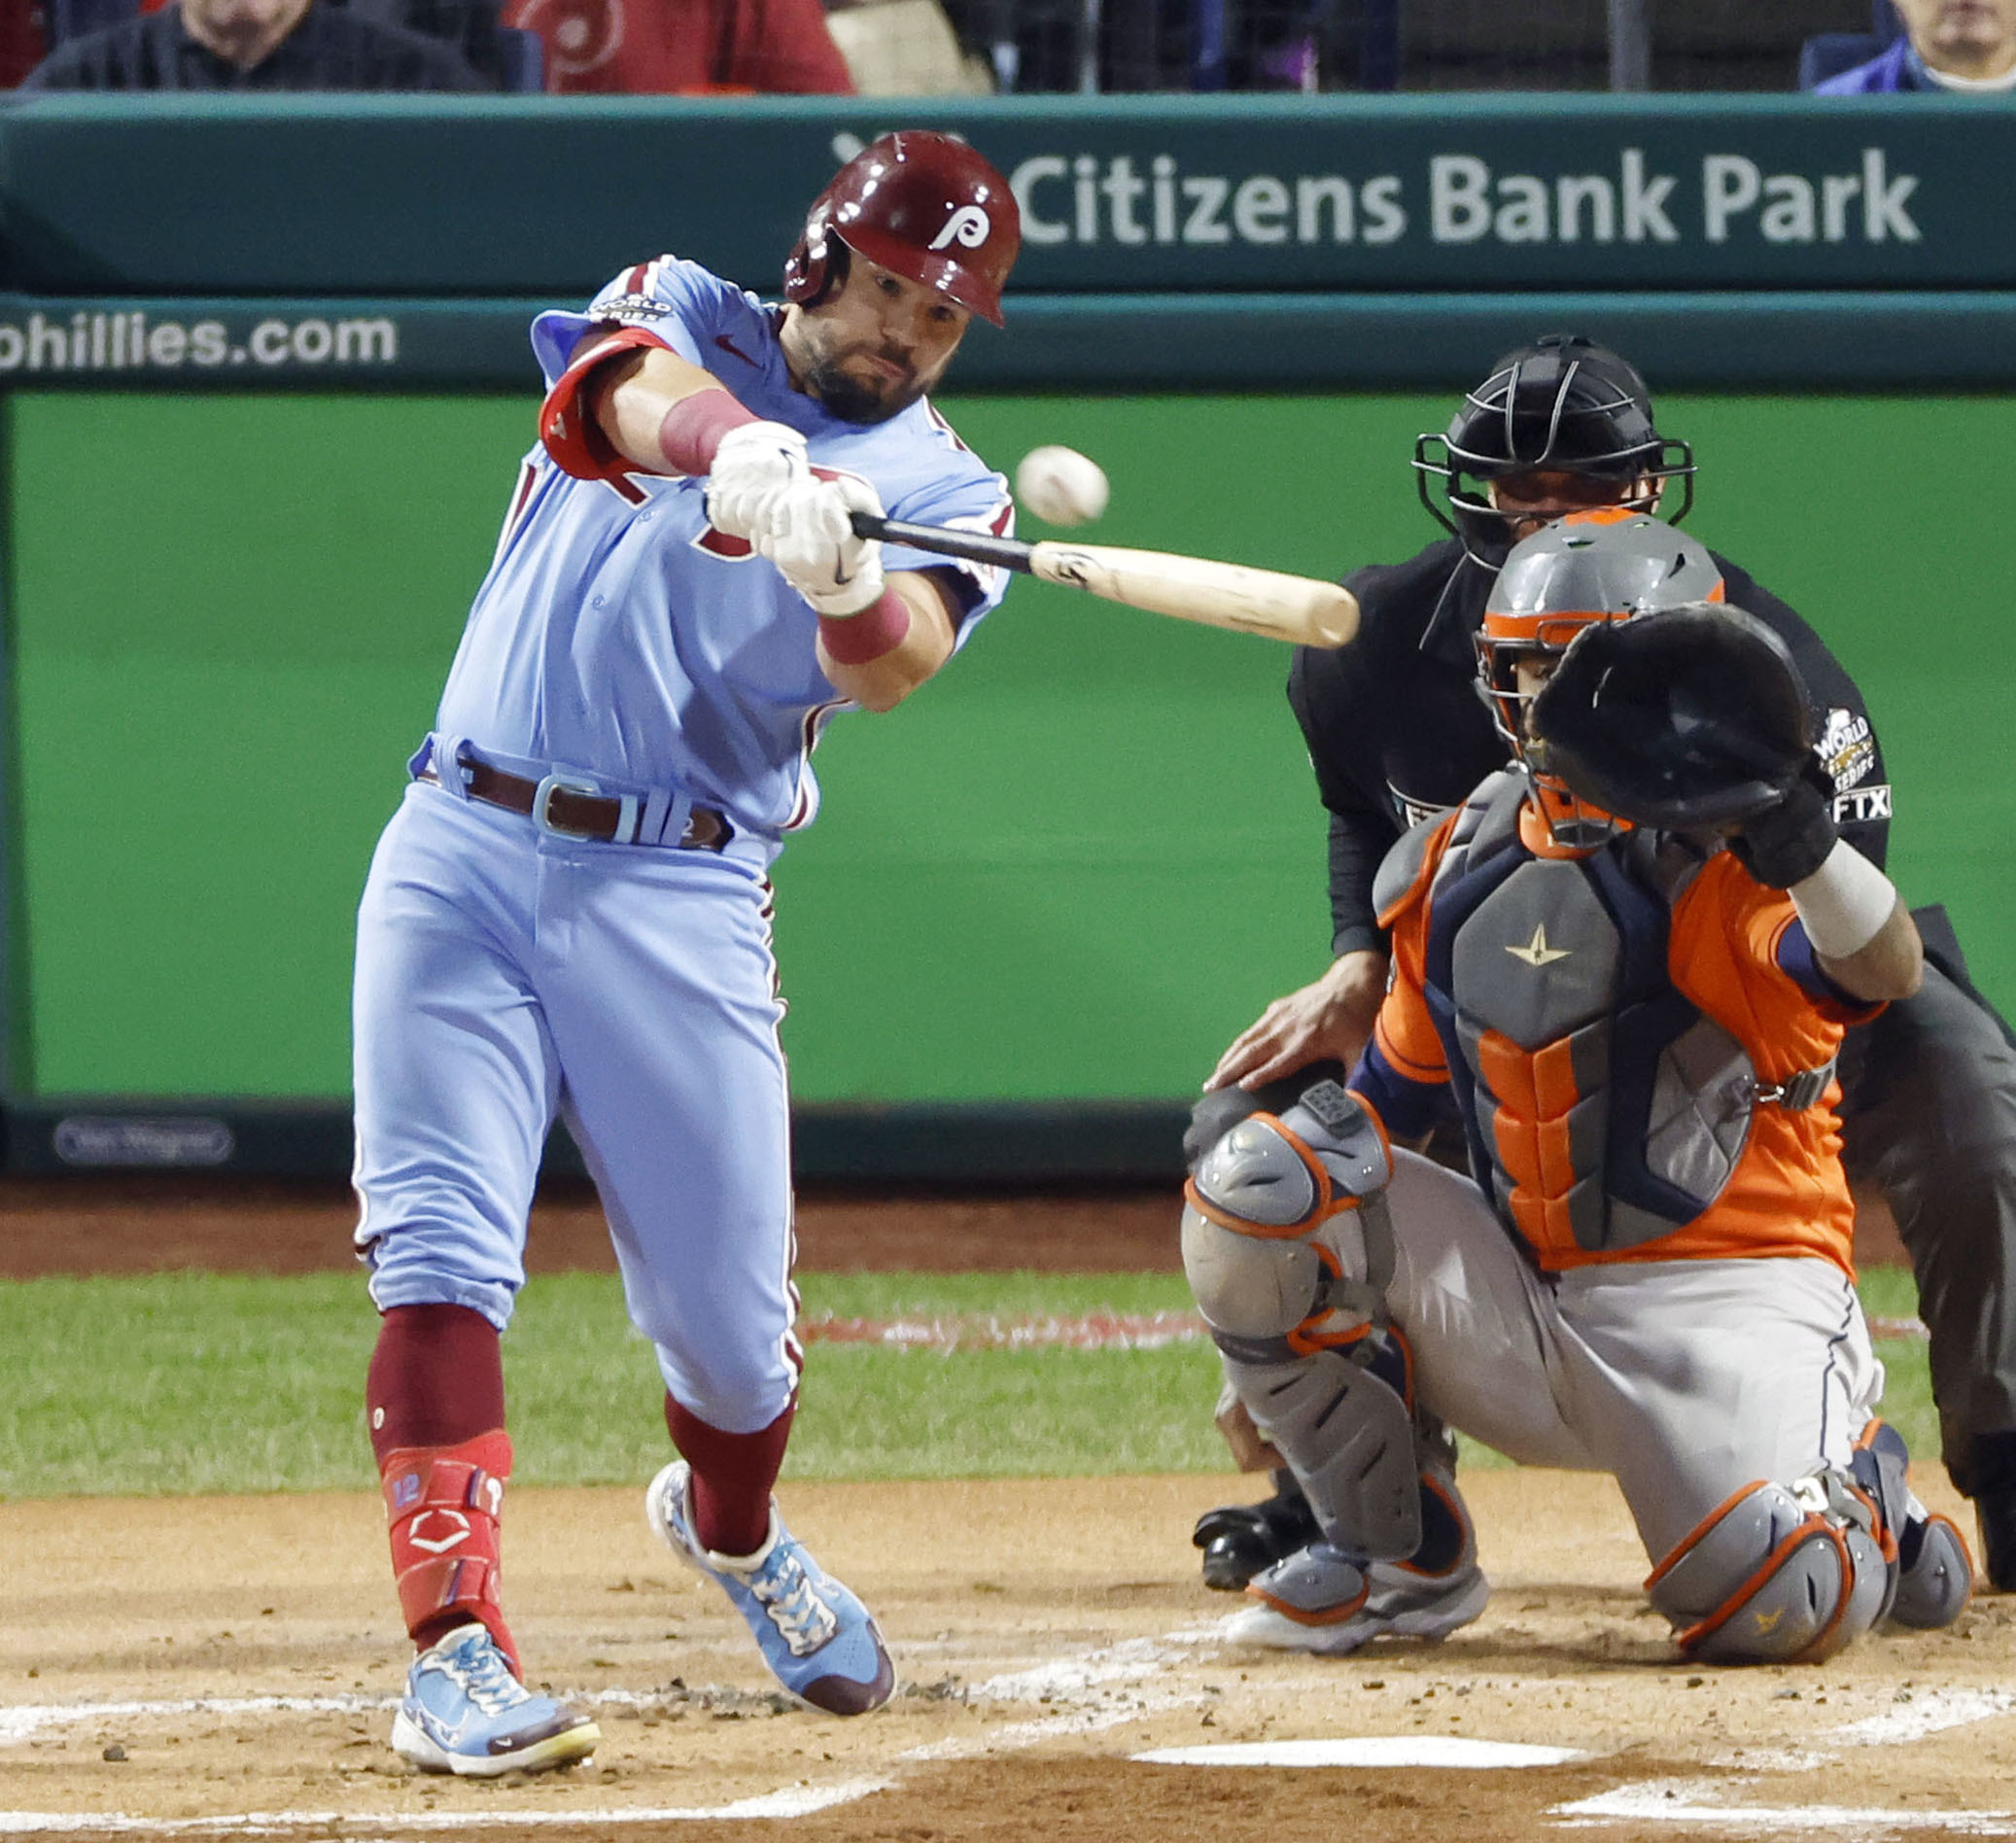 Left fielder Kyle Schwarber (L) of the Philadelphia Phillies hits a home run during the first inning in Game 5 of the MLB World Series against the Houston Astros at Citizens Bank Park in Philadelphia, Pennsylvania, November 3, 2022. /CFP